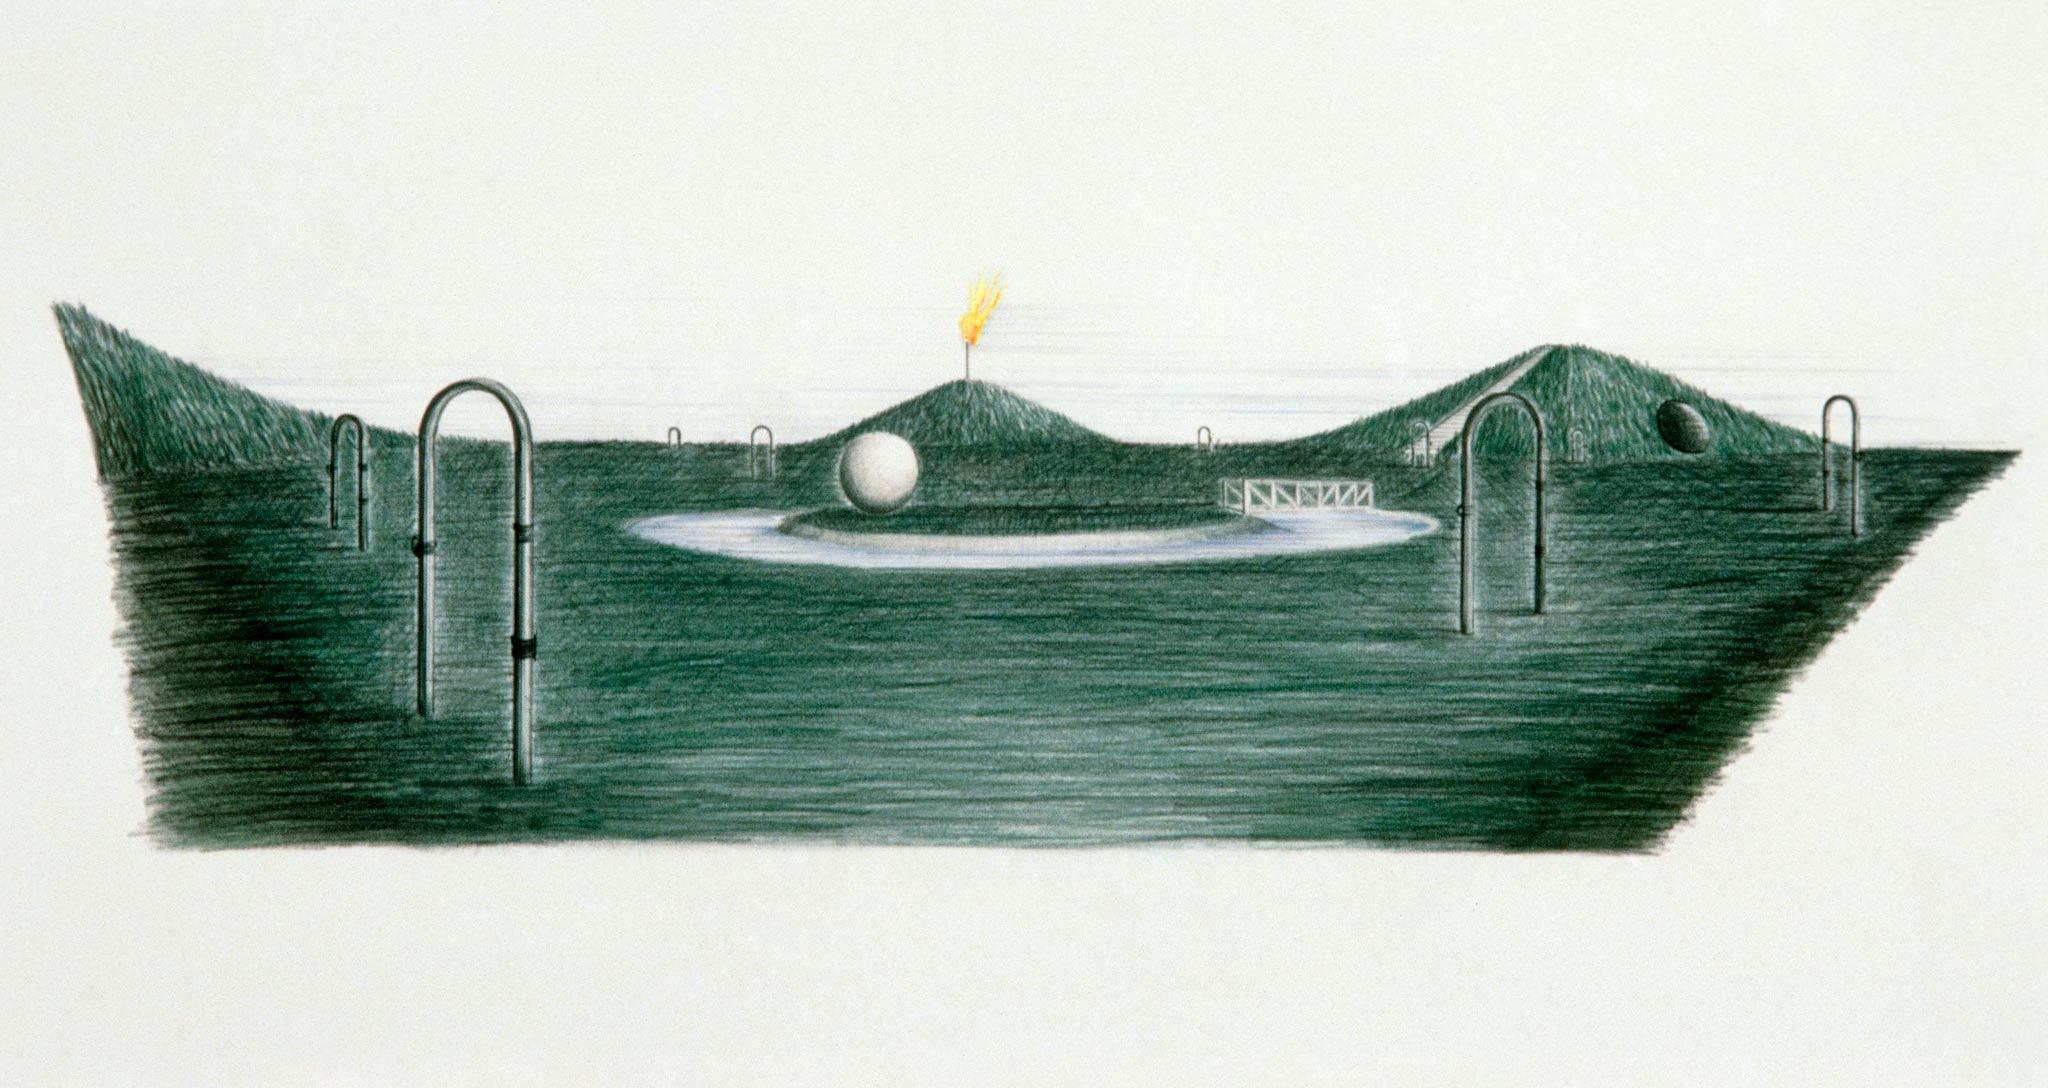 a colored pencil drawing showing a site plan for skymound with paths, a pond, methane flames, and greenery.